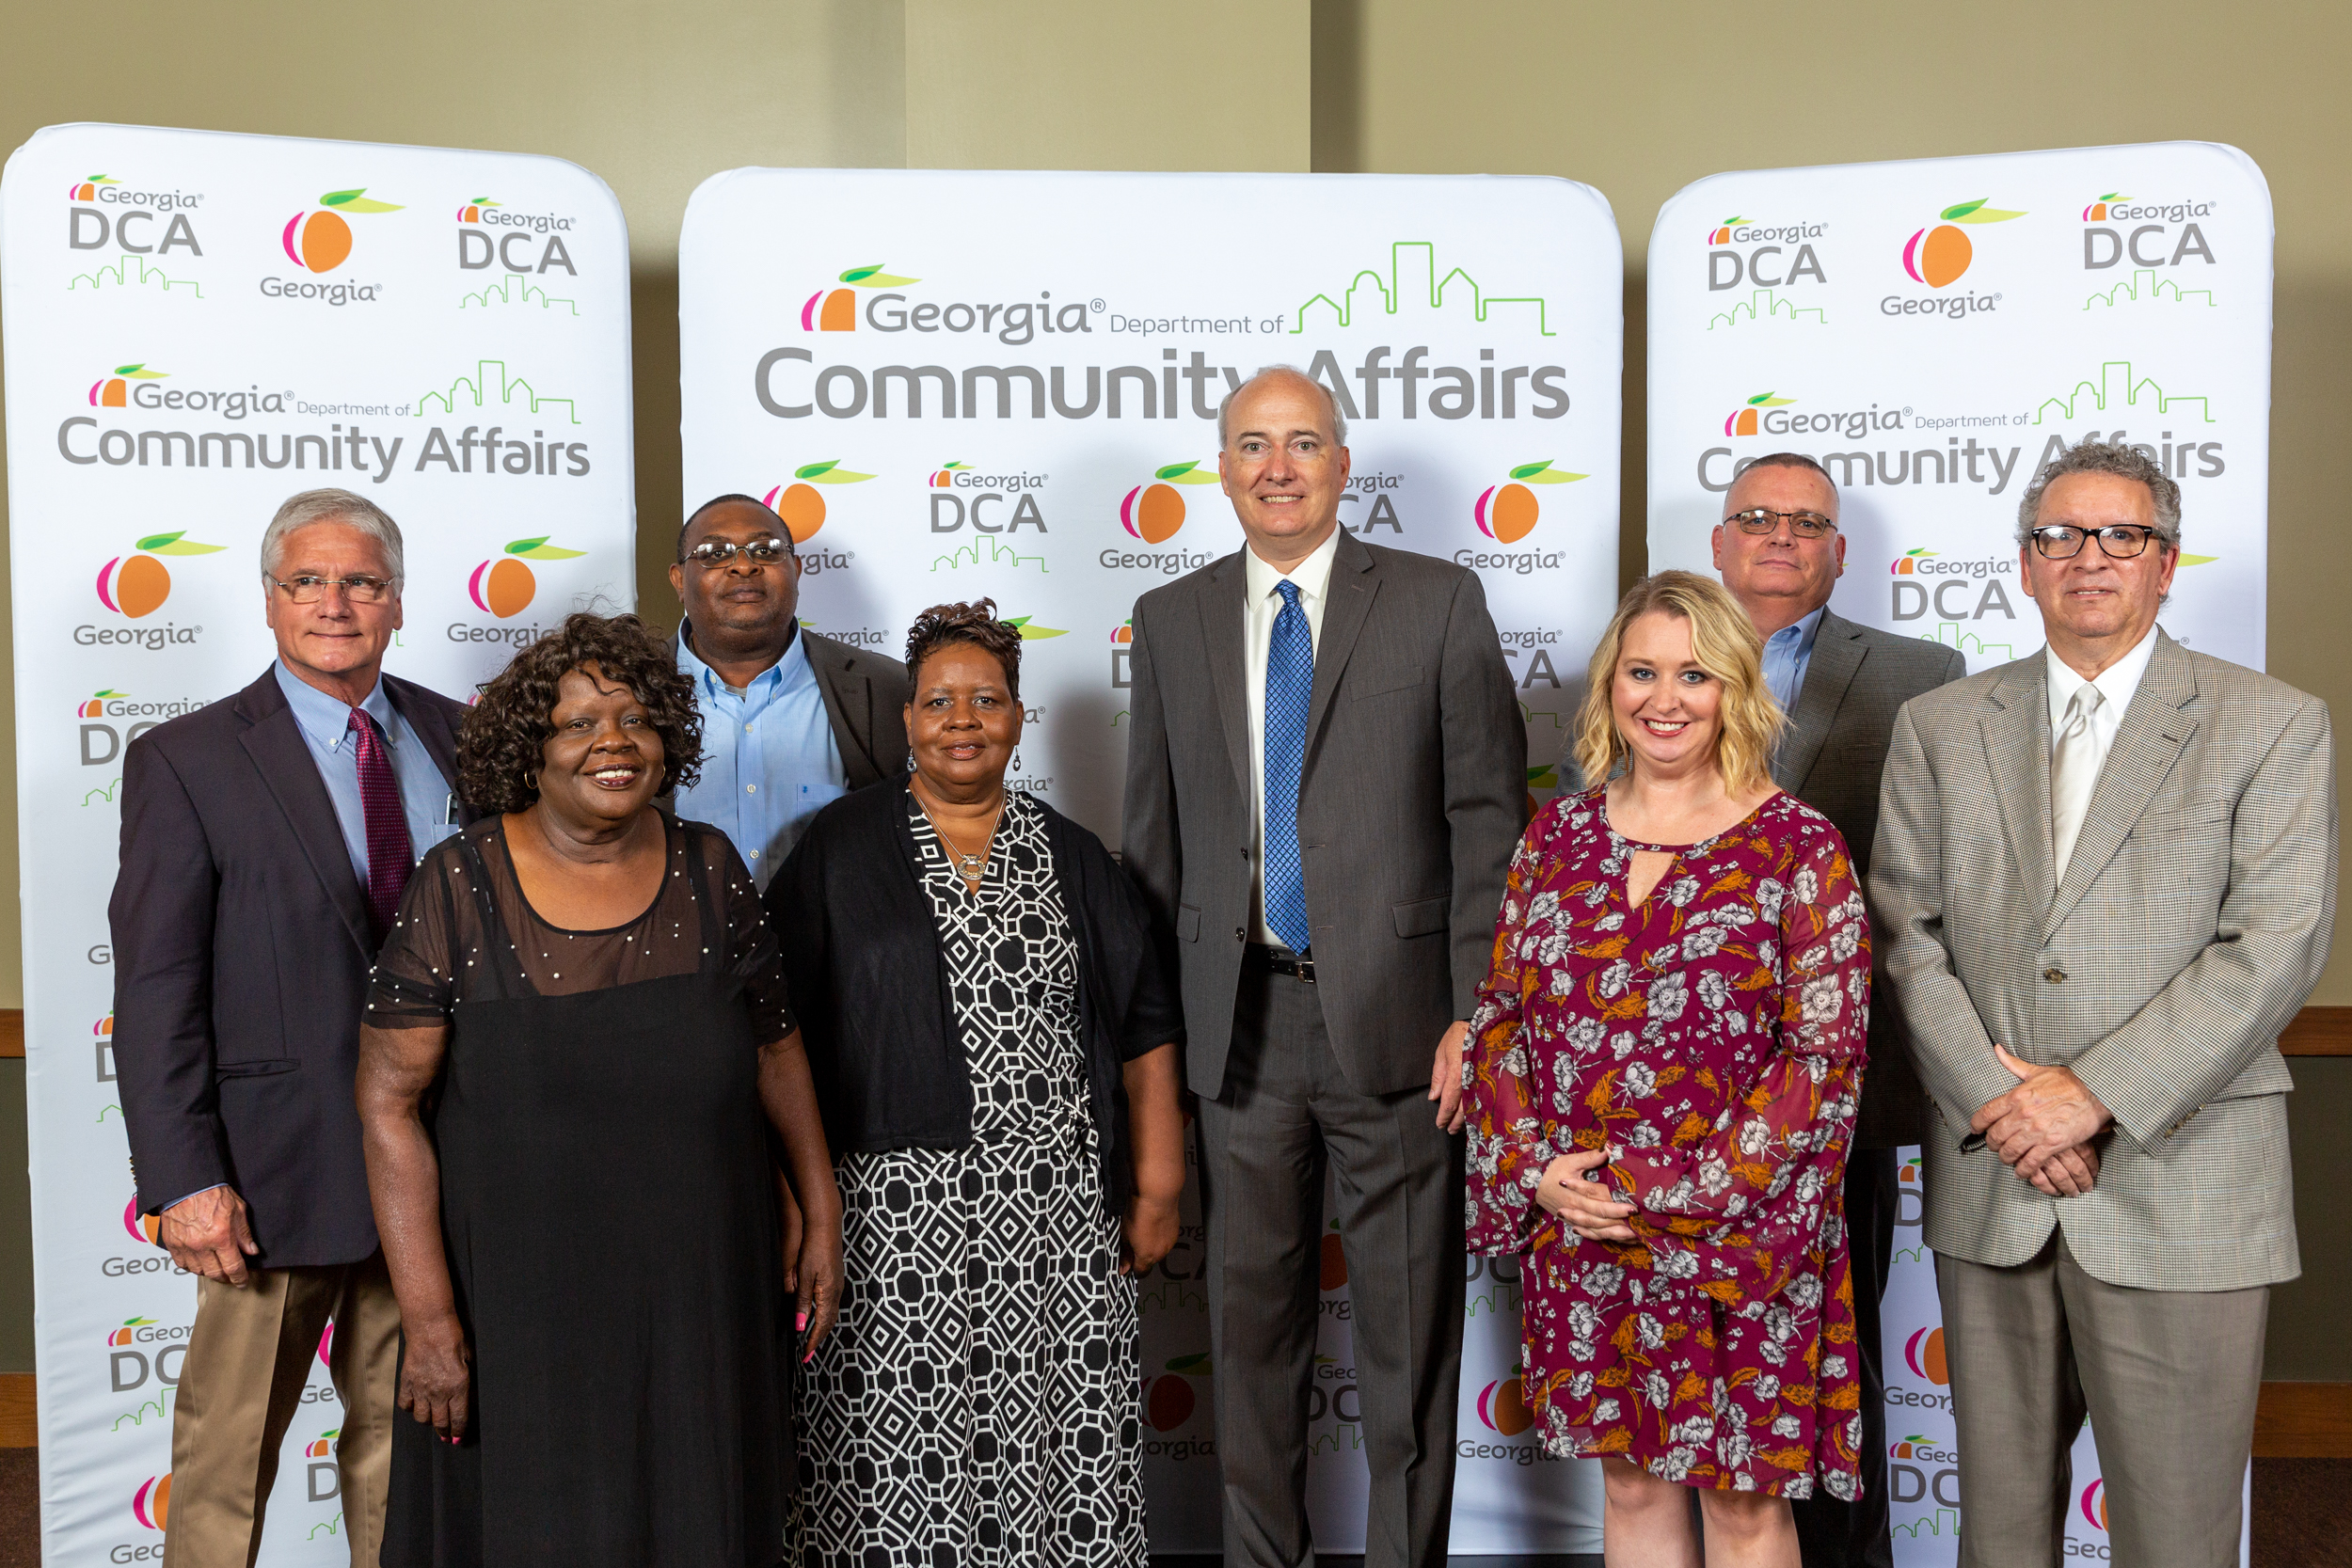 Members of the City of Adel pose with DCA Commissioner Christopher Nunn. Adel received a GA Initiative for Community Housing designation. 